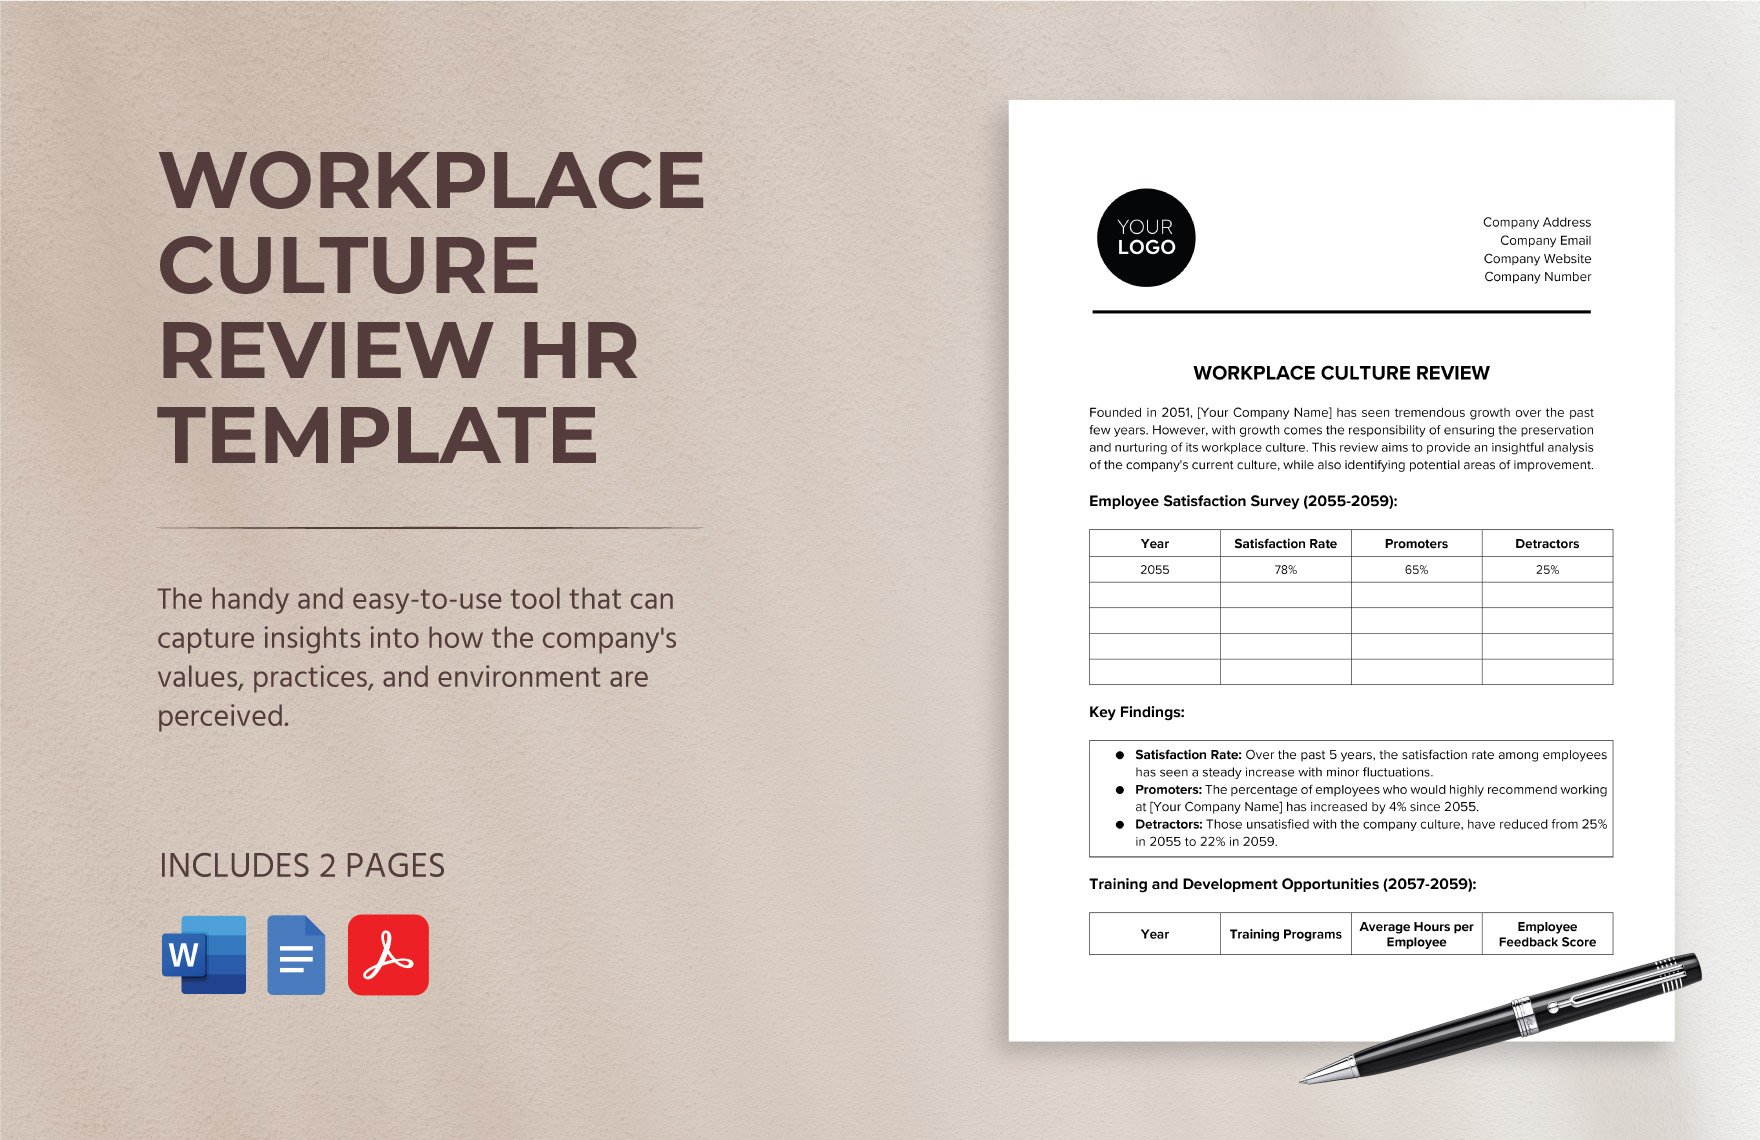 Workplace Culture Review HR Template